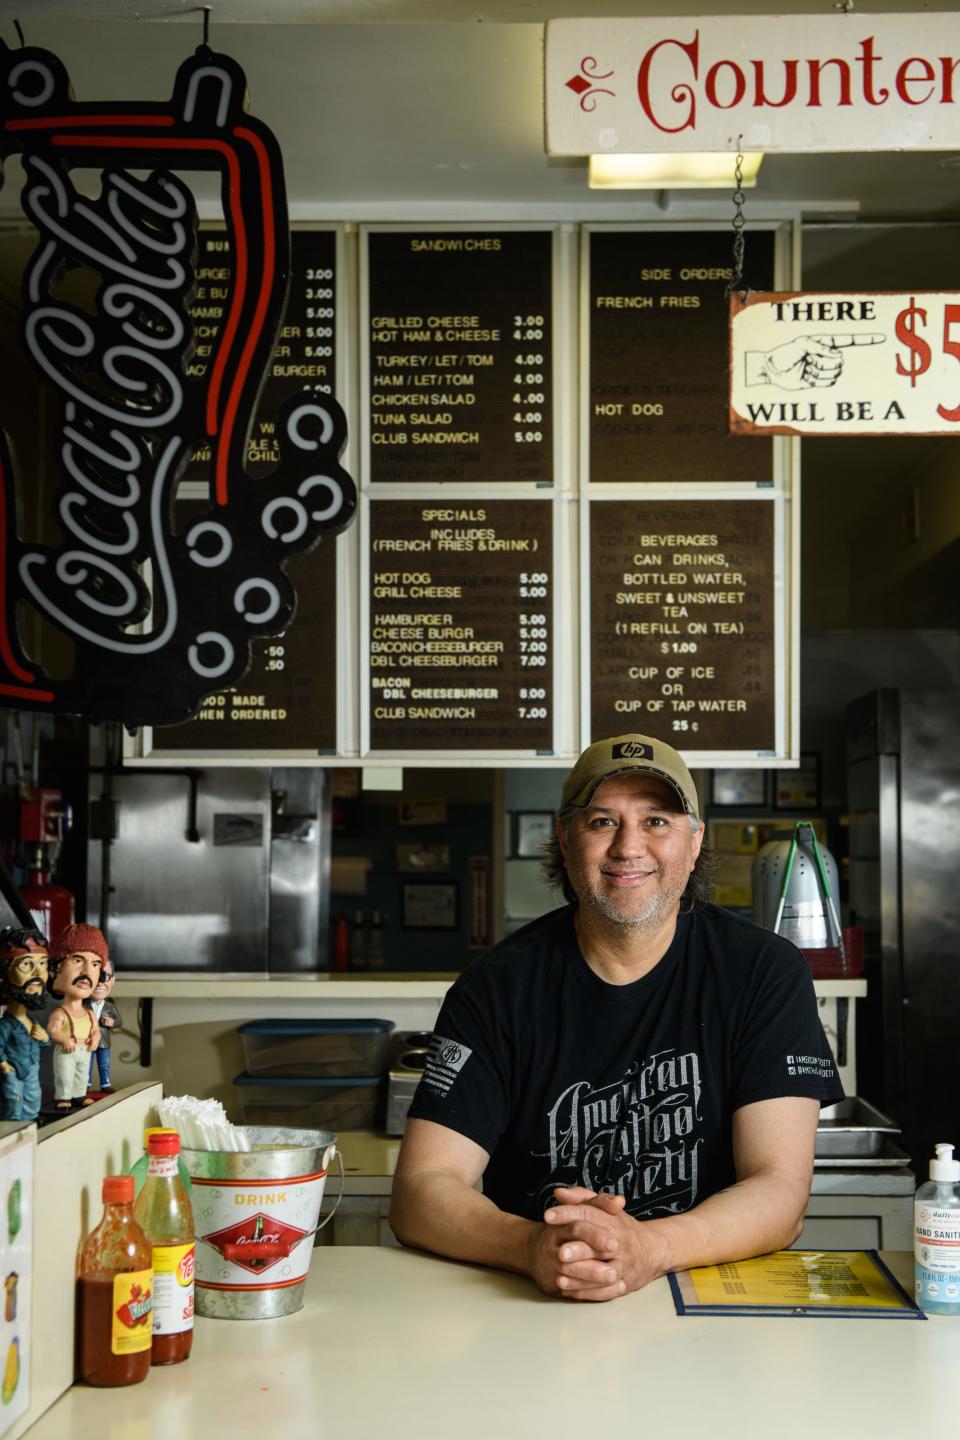 Frank Fernandez, owner of Robertson's Sandwich Shop at 2712 Bragg Blvd. in Eutaw Shopping Center. Fernandez said the sandwich shop has served several well-known people since it opened in 1982.